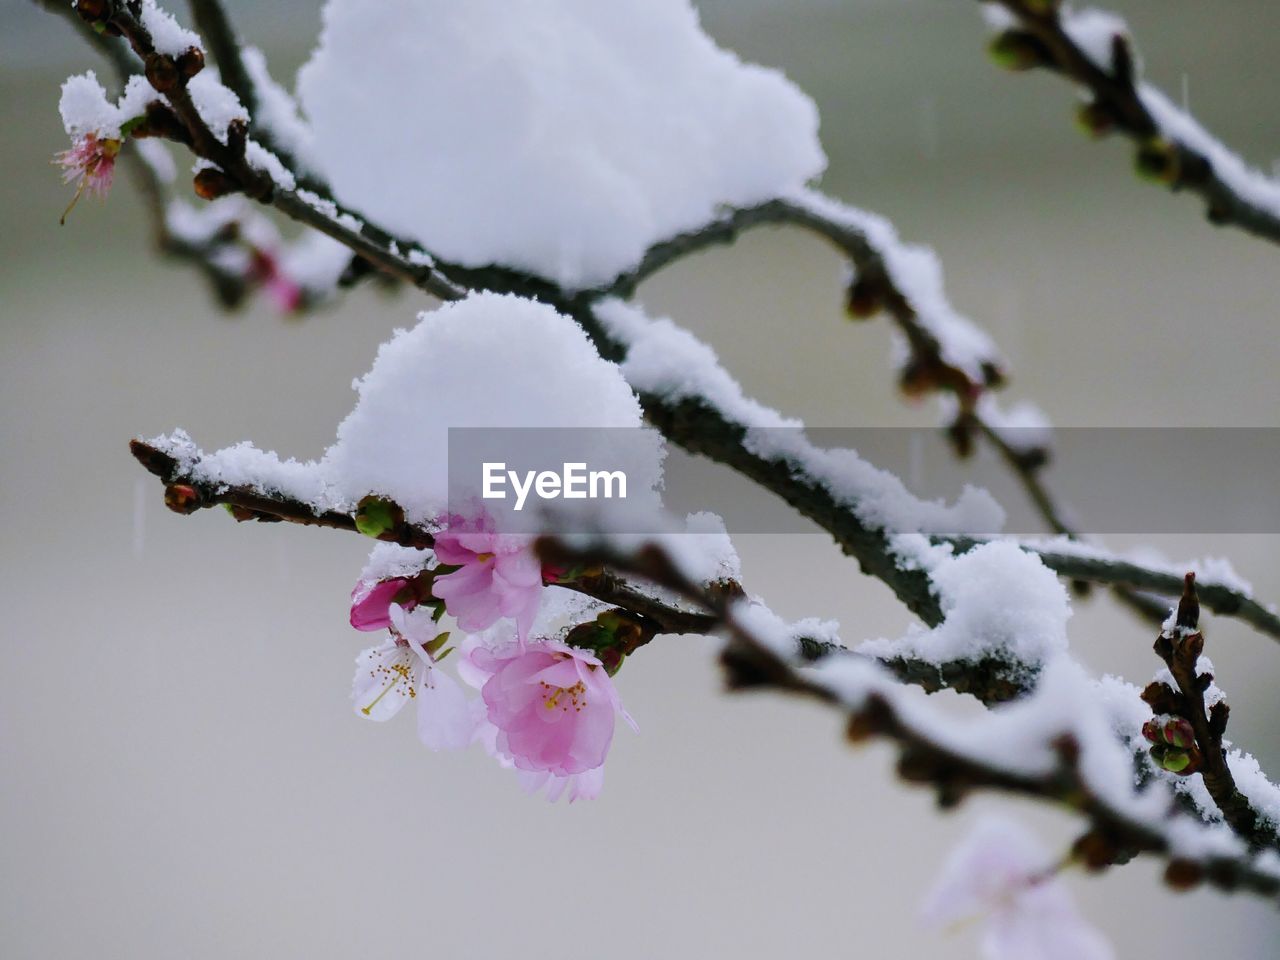 CLOSE-UP OF FROZEN FLOWERS ON TREE BRANCH